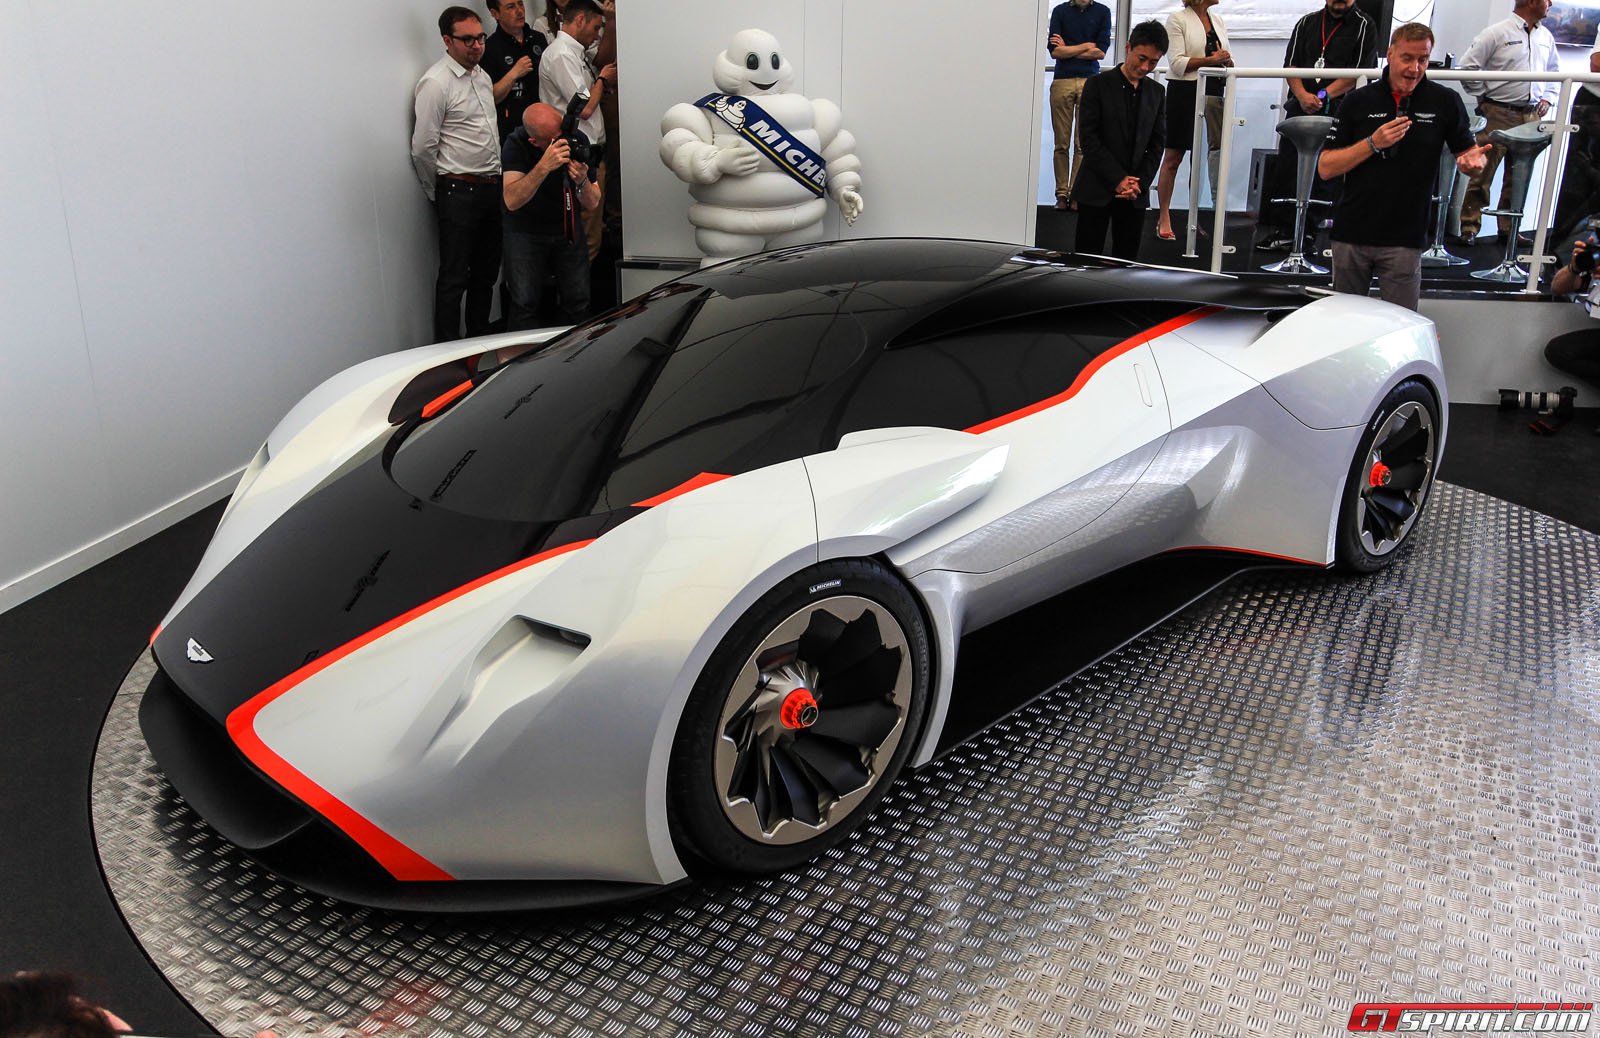 10 Amazing Vision GT Cars In Real Life 